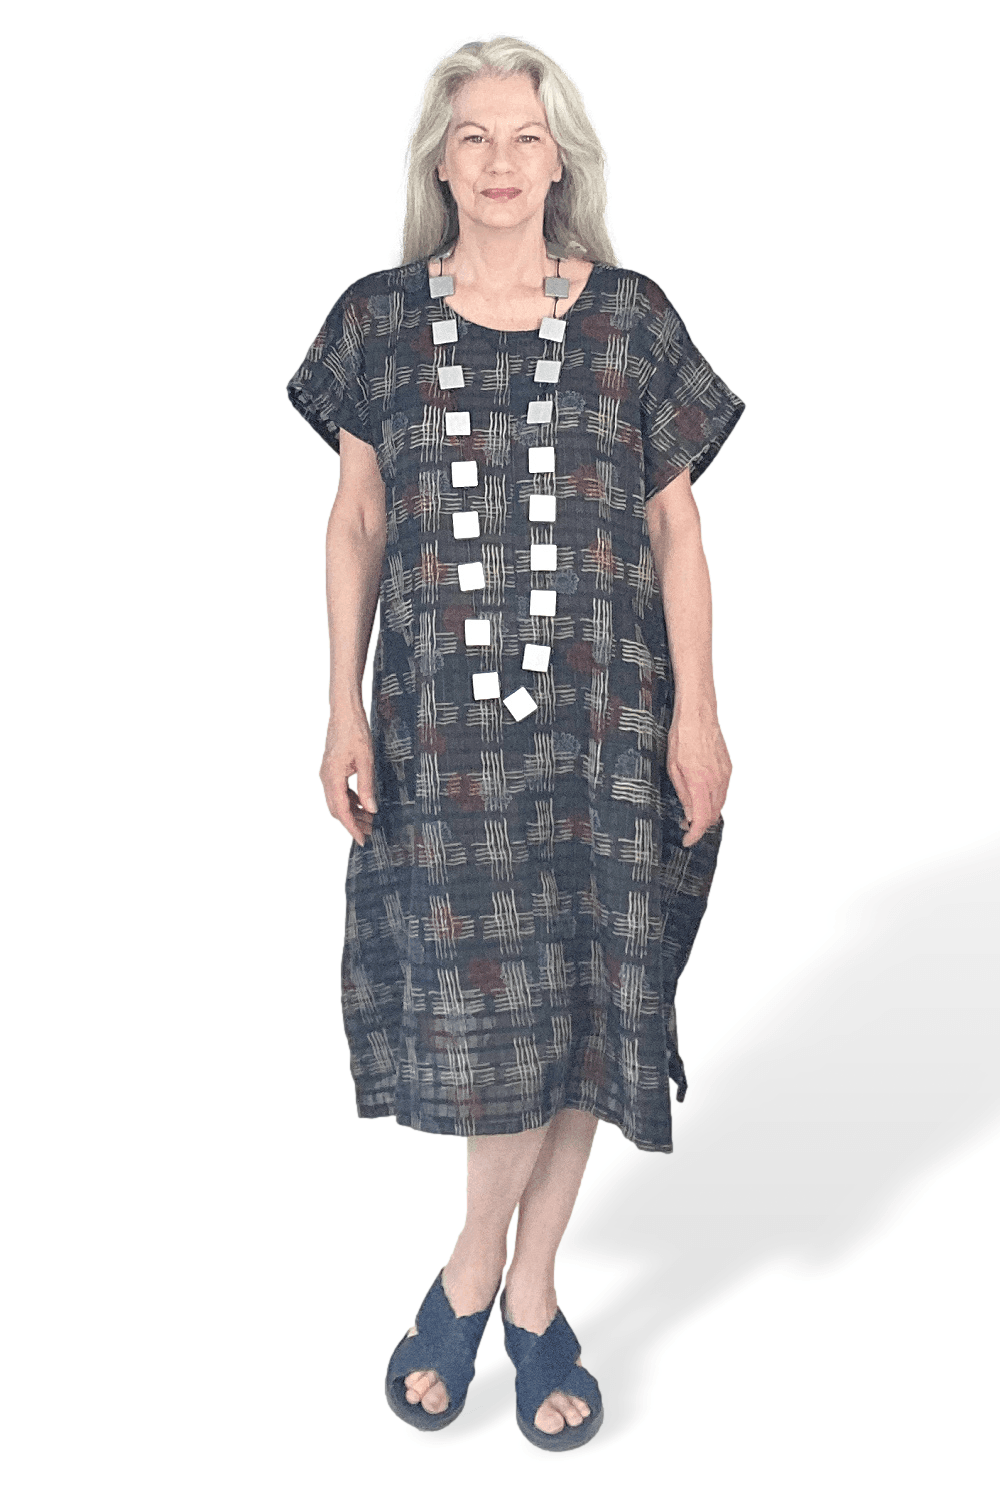 Woman wearing a short sleeve black loose fit dress with cross hatch patterns. She is wearing a long silver wooden square beaded necklace.